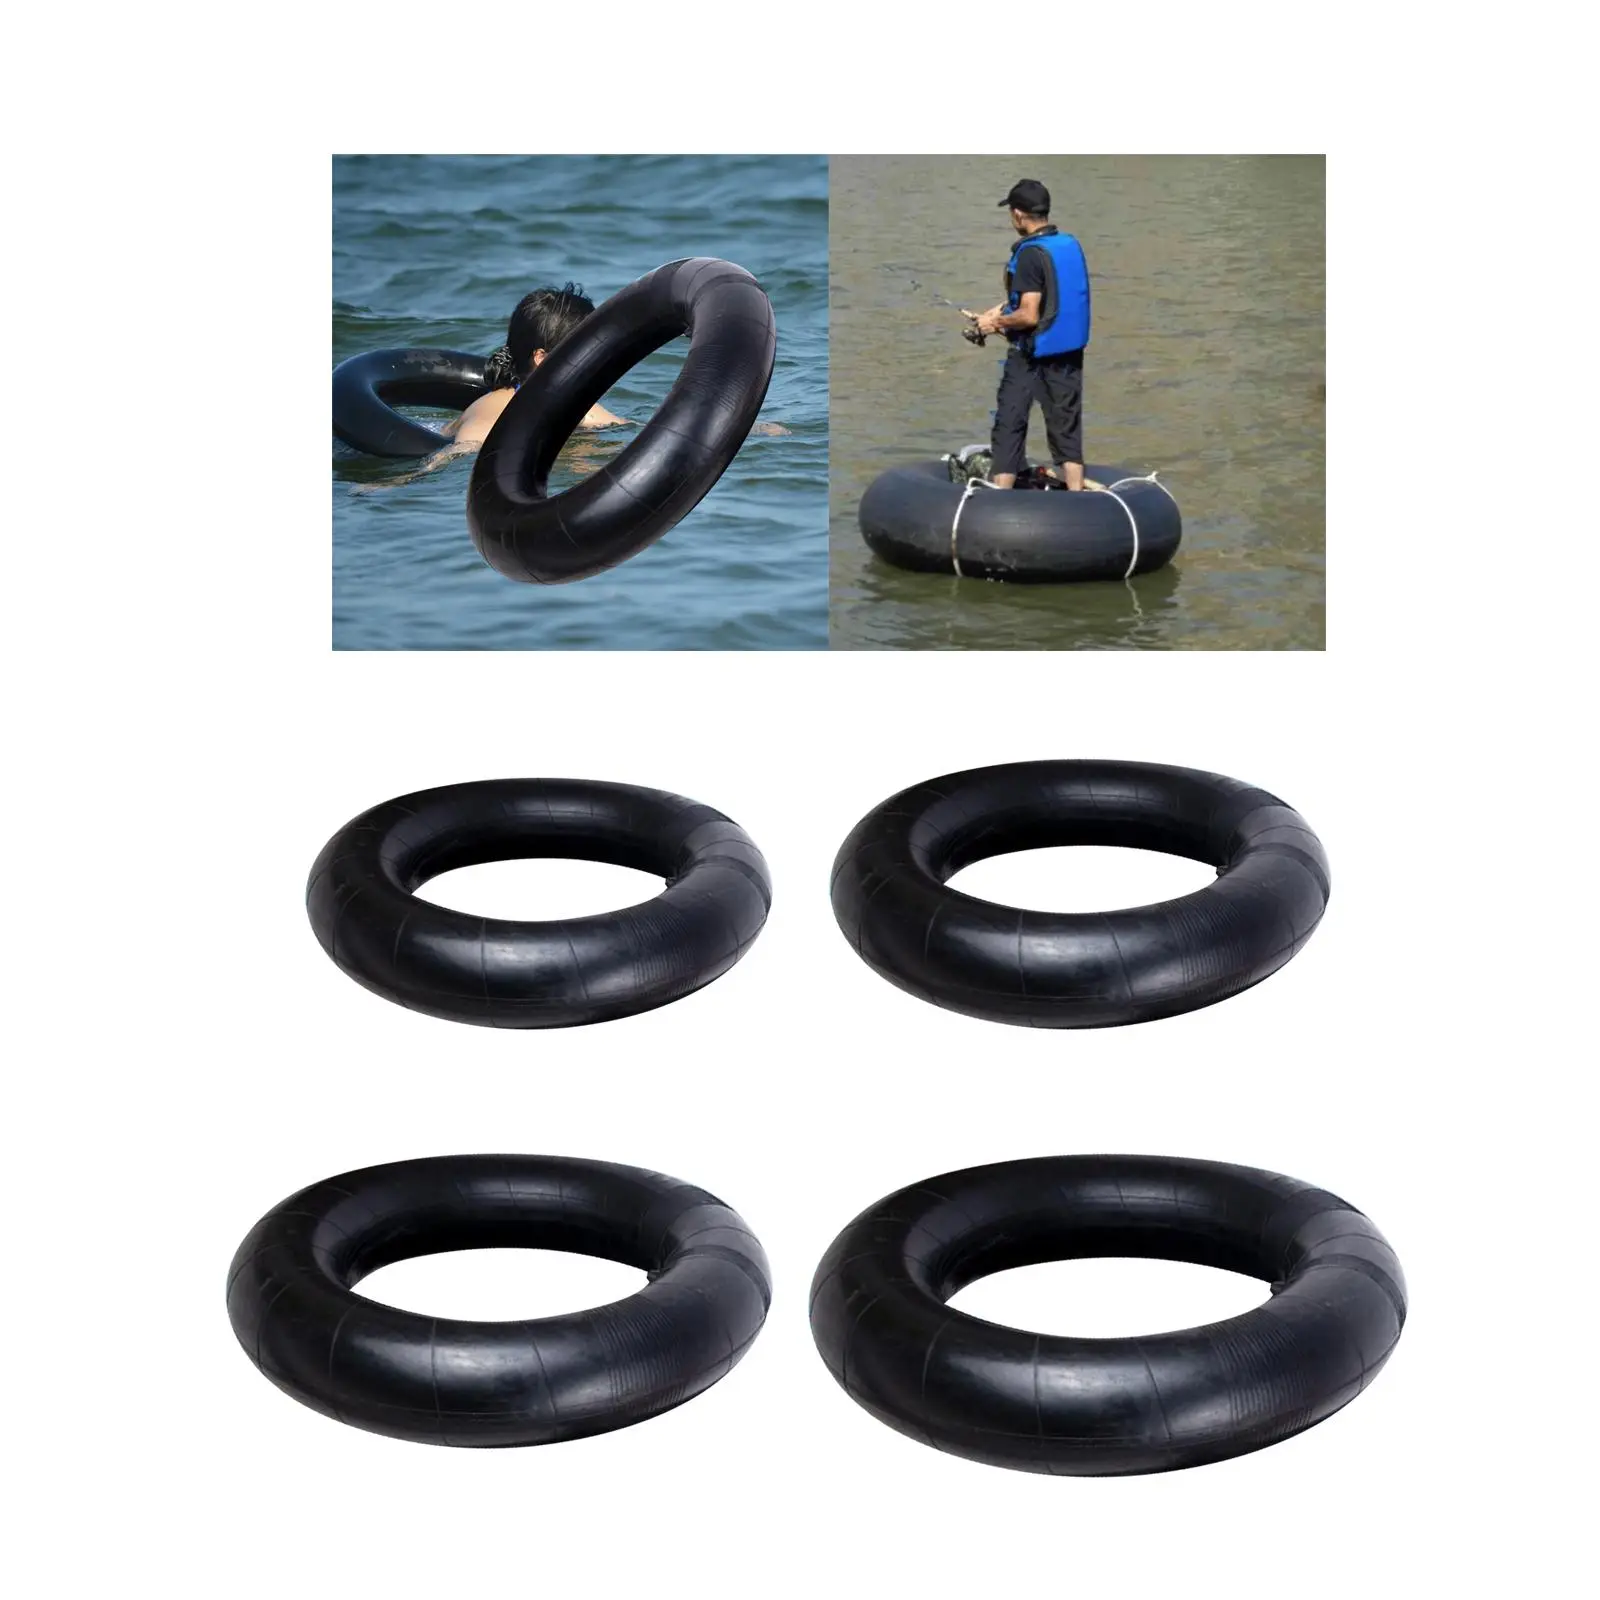 River Tube for Floating Rubber Snow Tube Durable Inflatable Water Tube Raft Swim